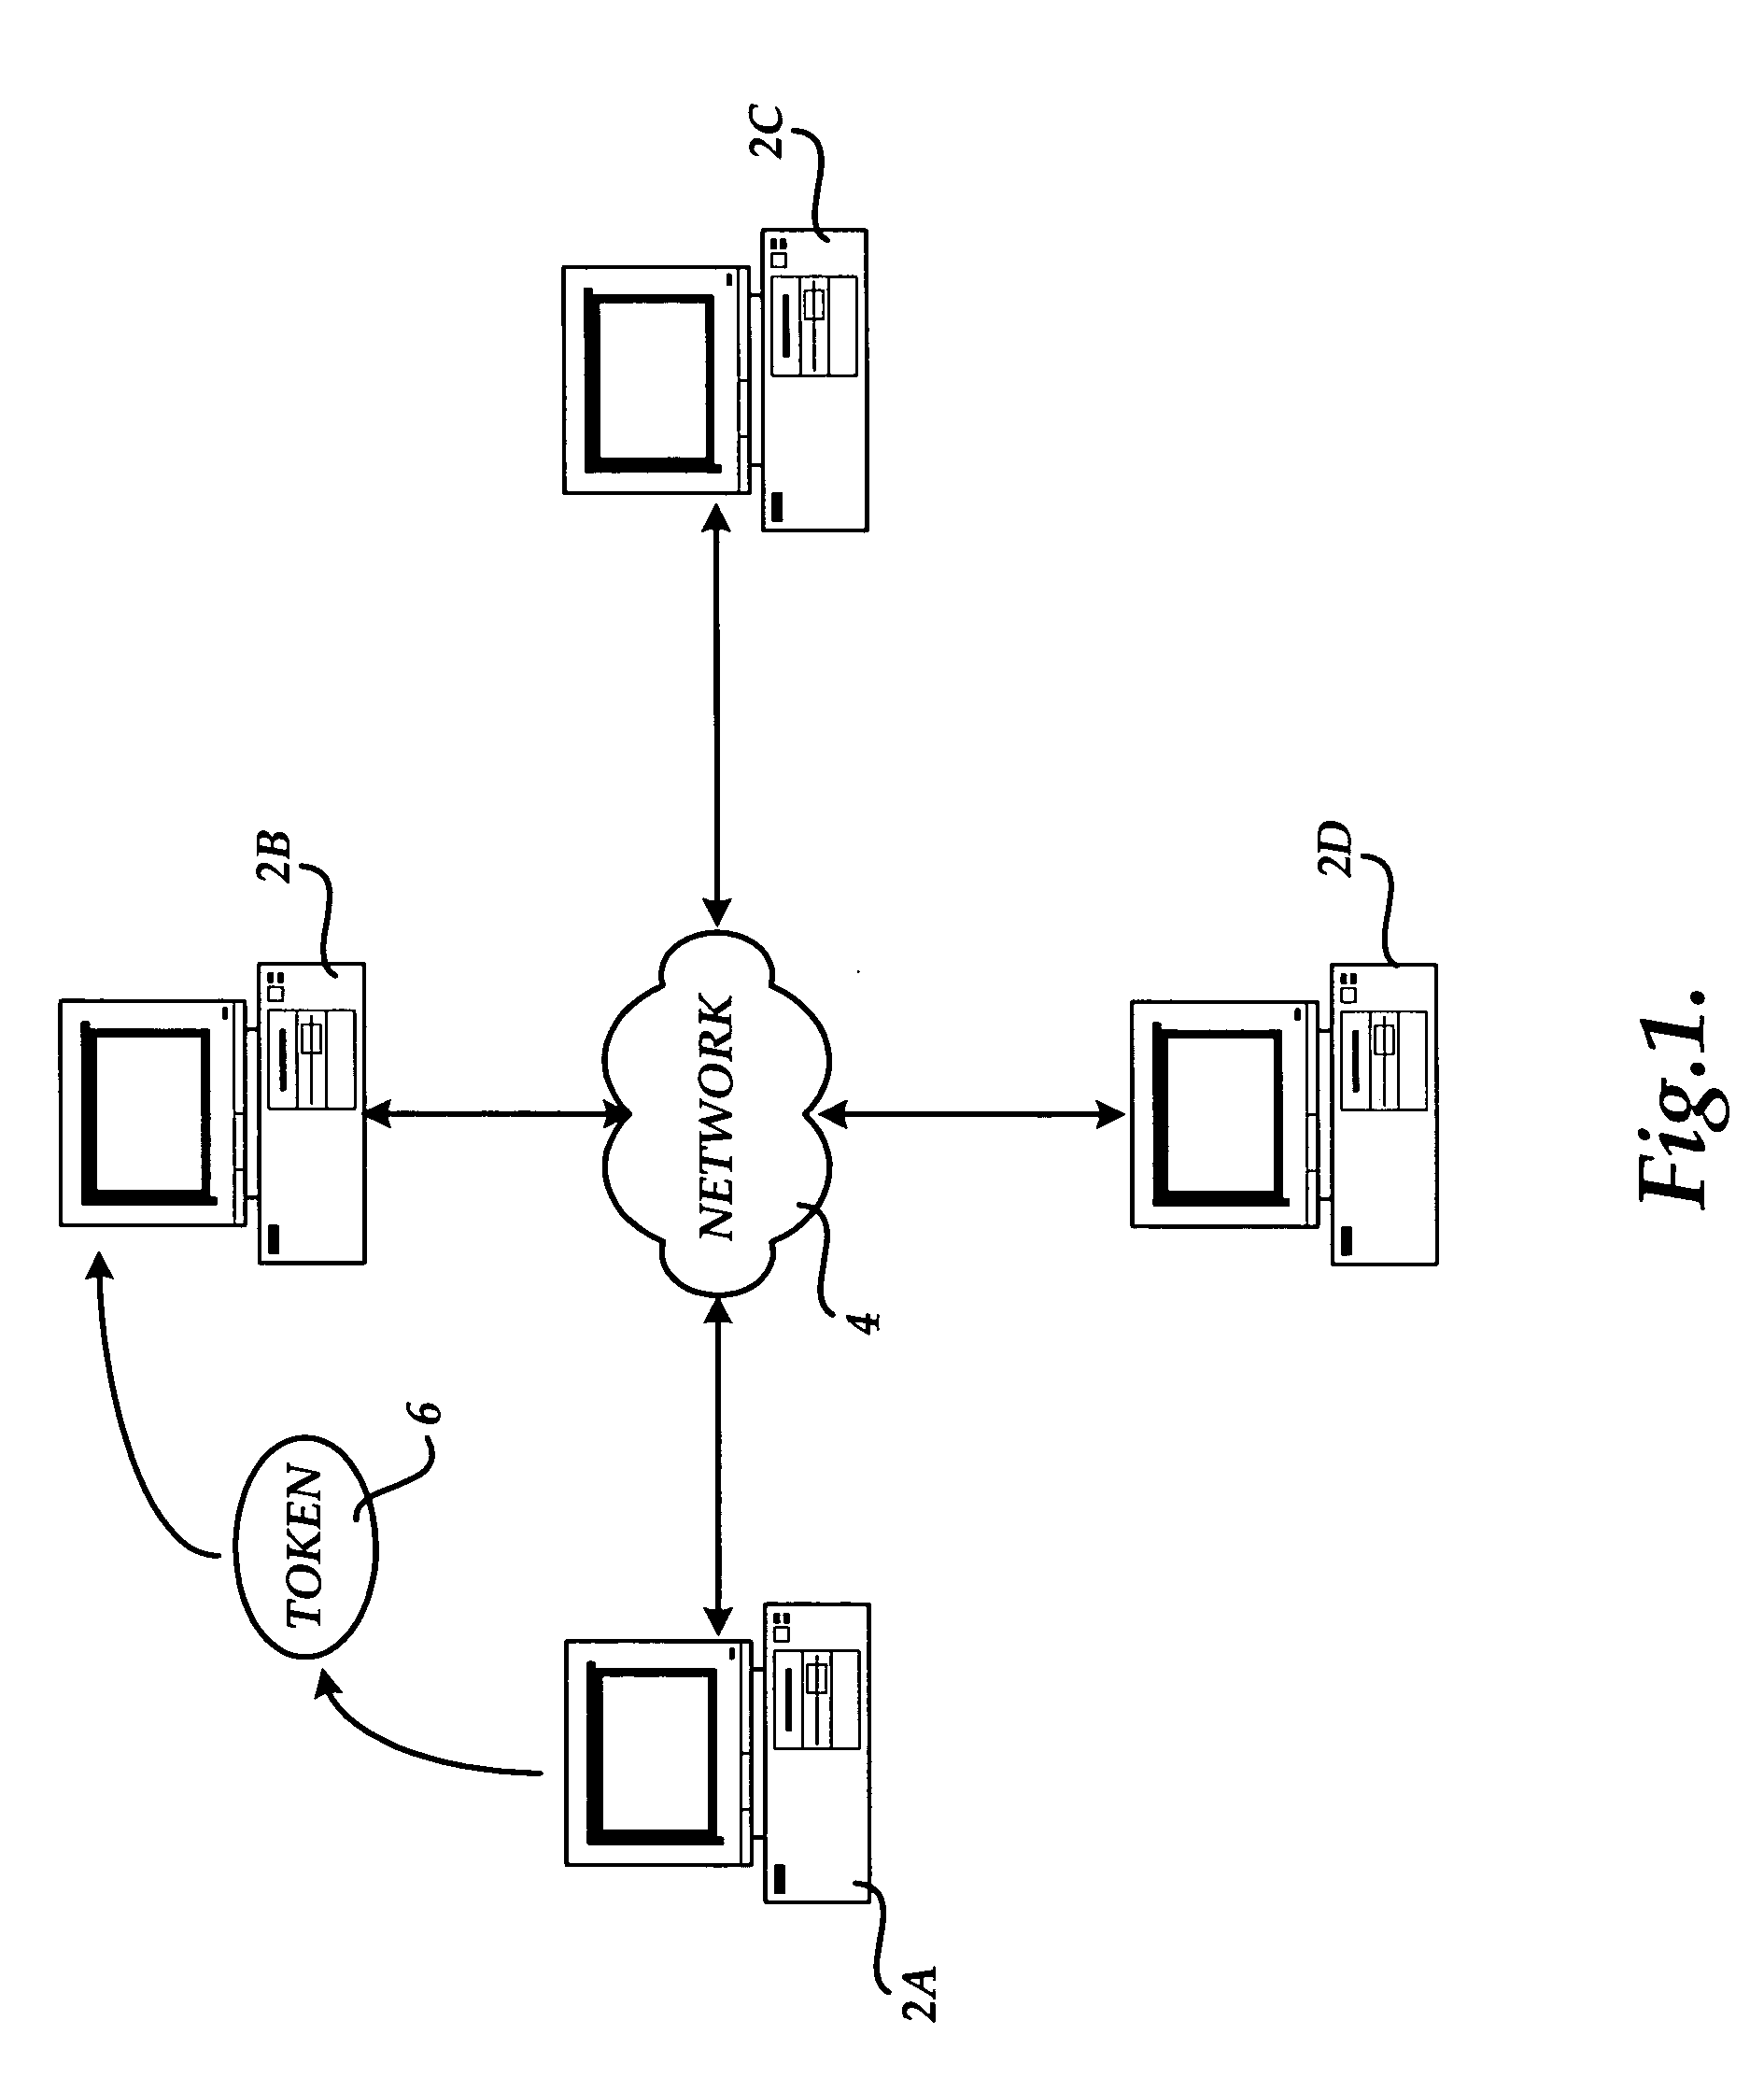 Method, system, and apparatus for enabling near real time collaboration on an electronic document through a plurality of computer systems